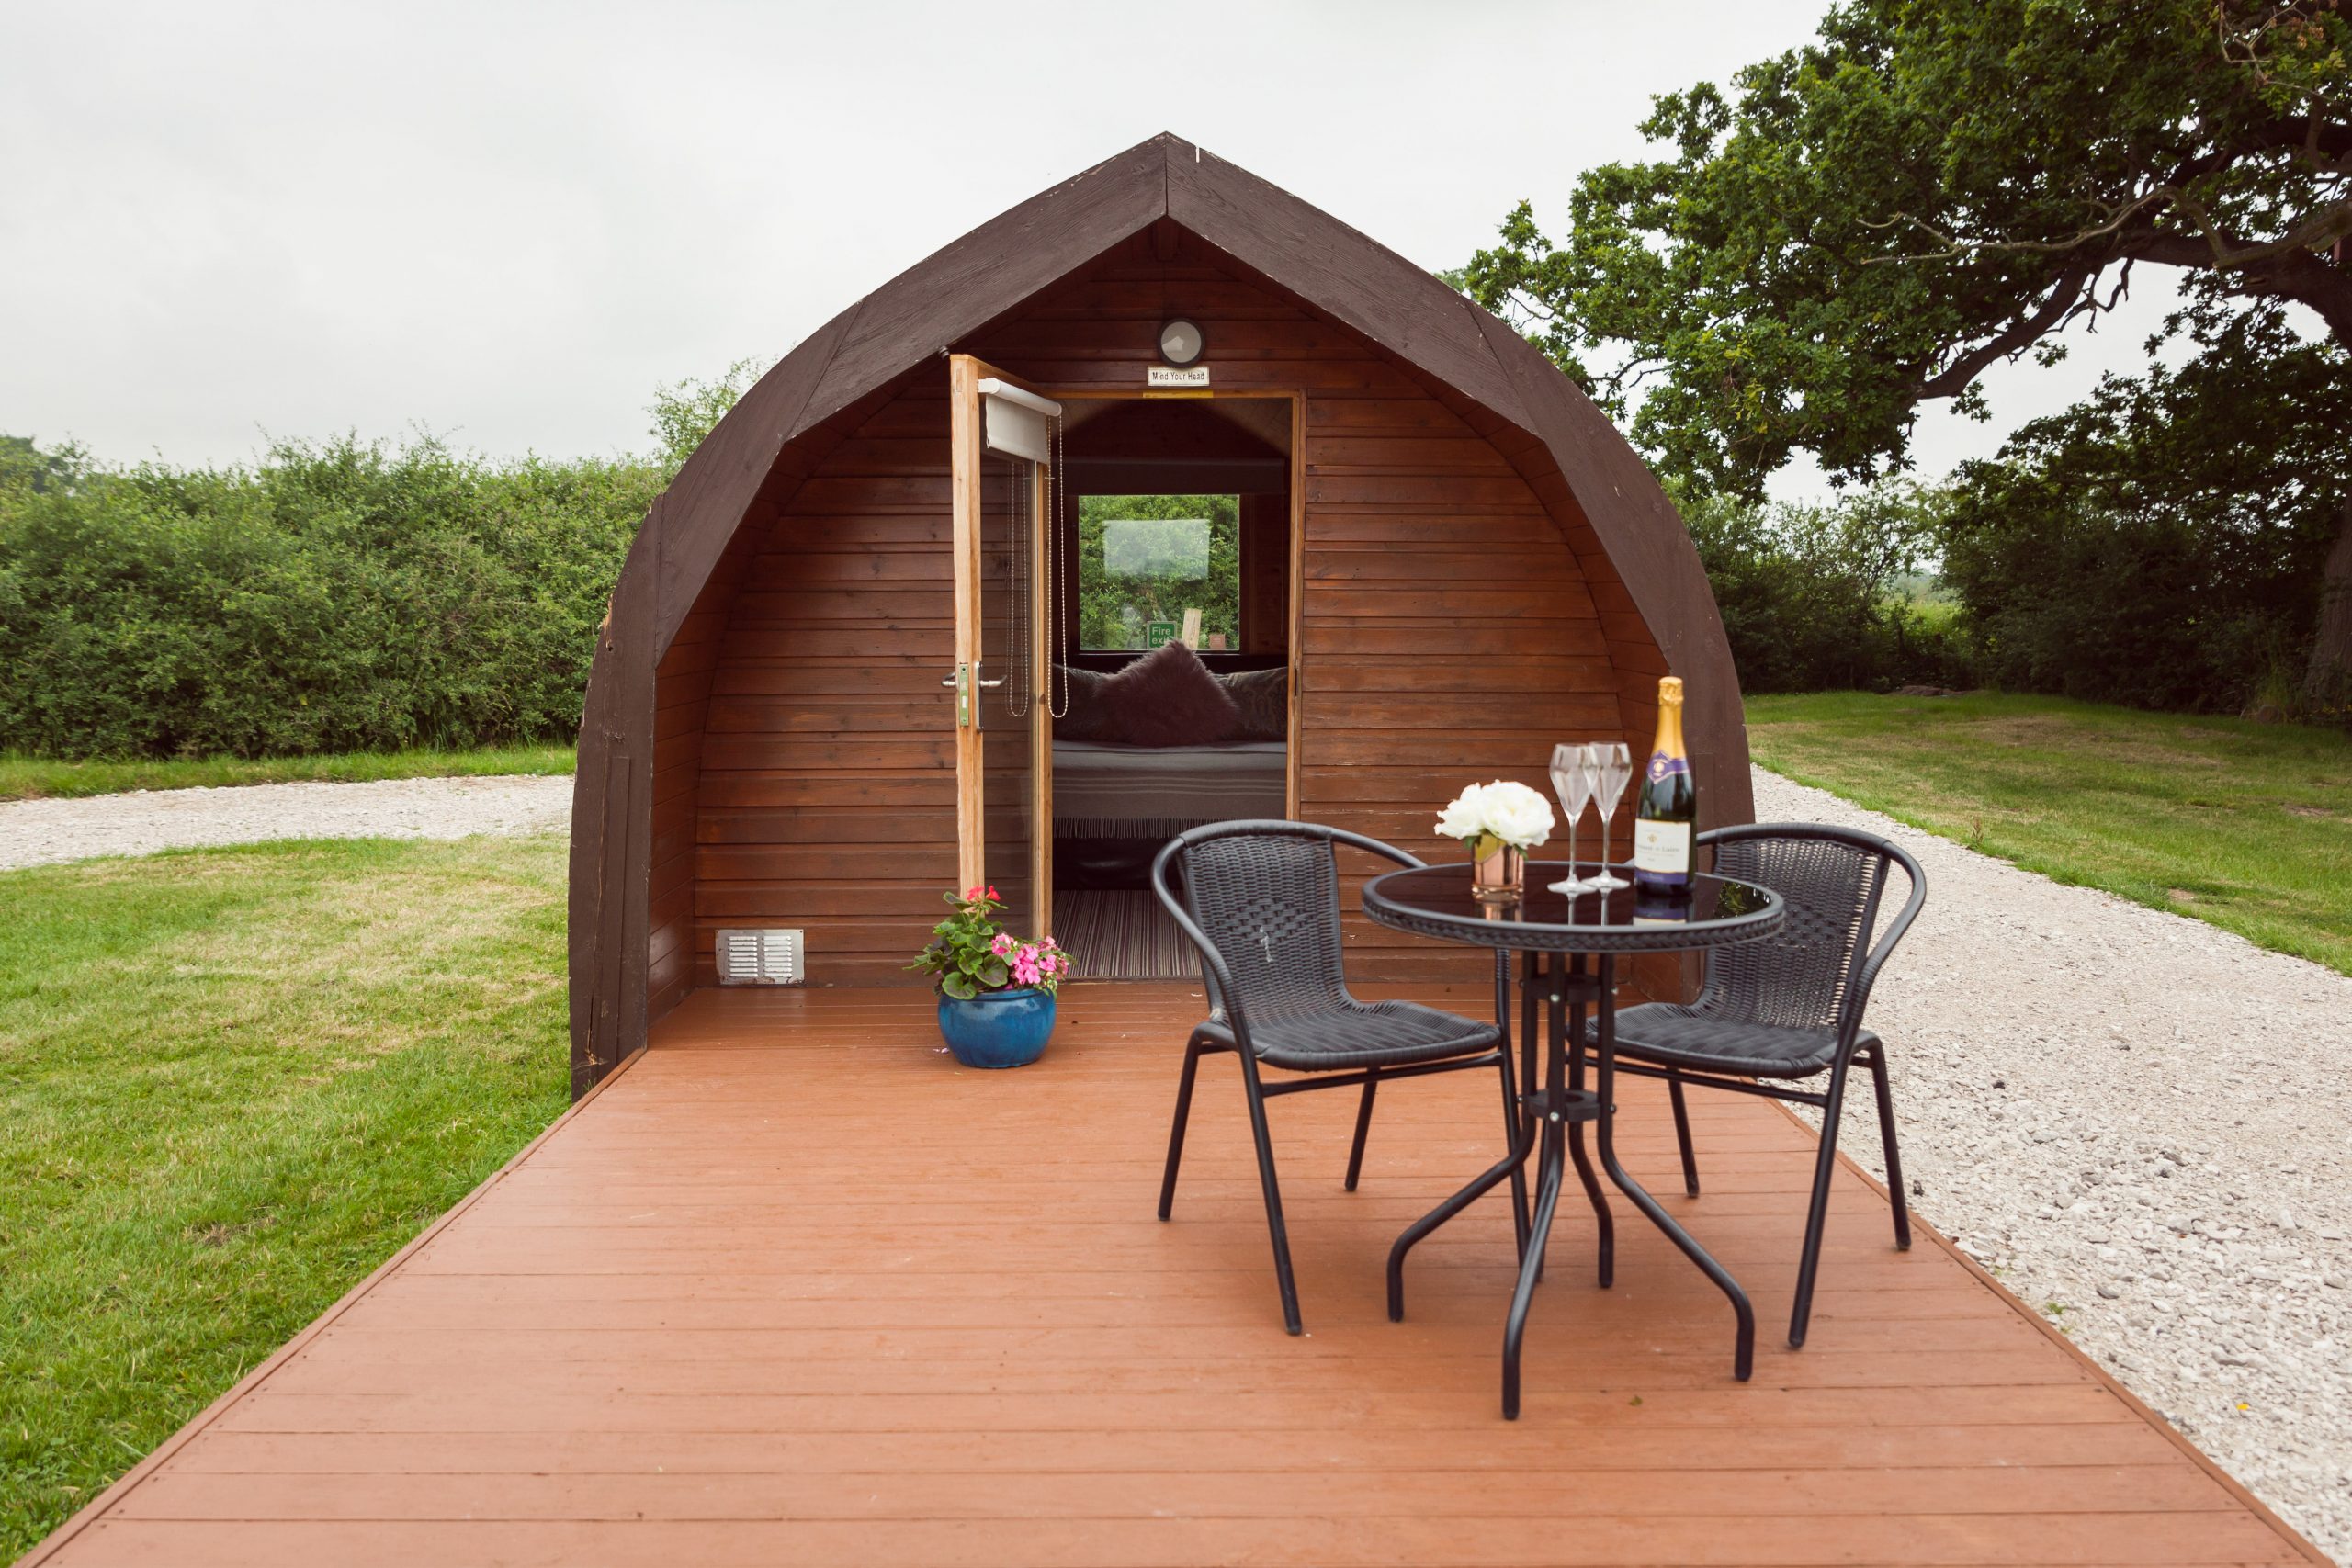 Pitch and Canvas | Glamping and Camping in Cheshire | Pod, outdoor table, wine